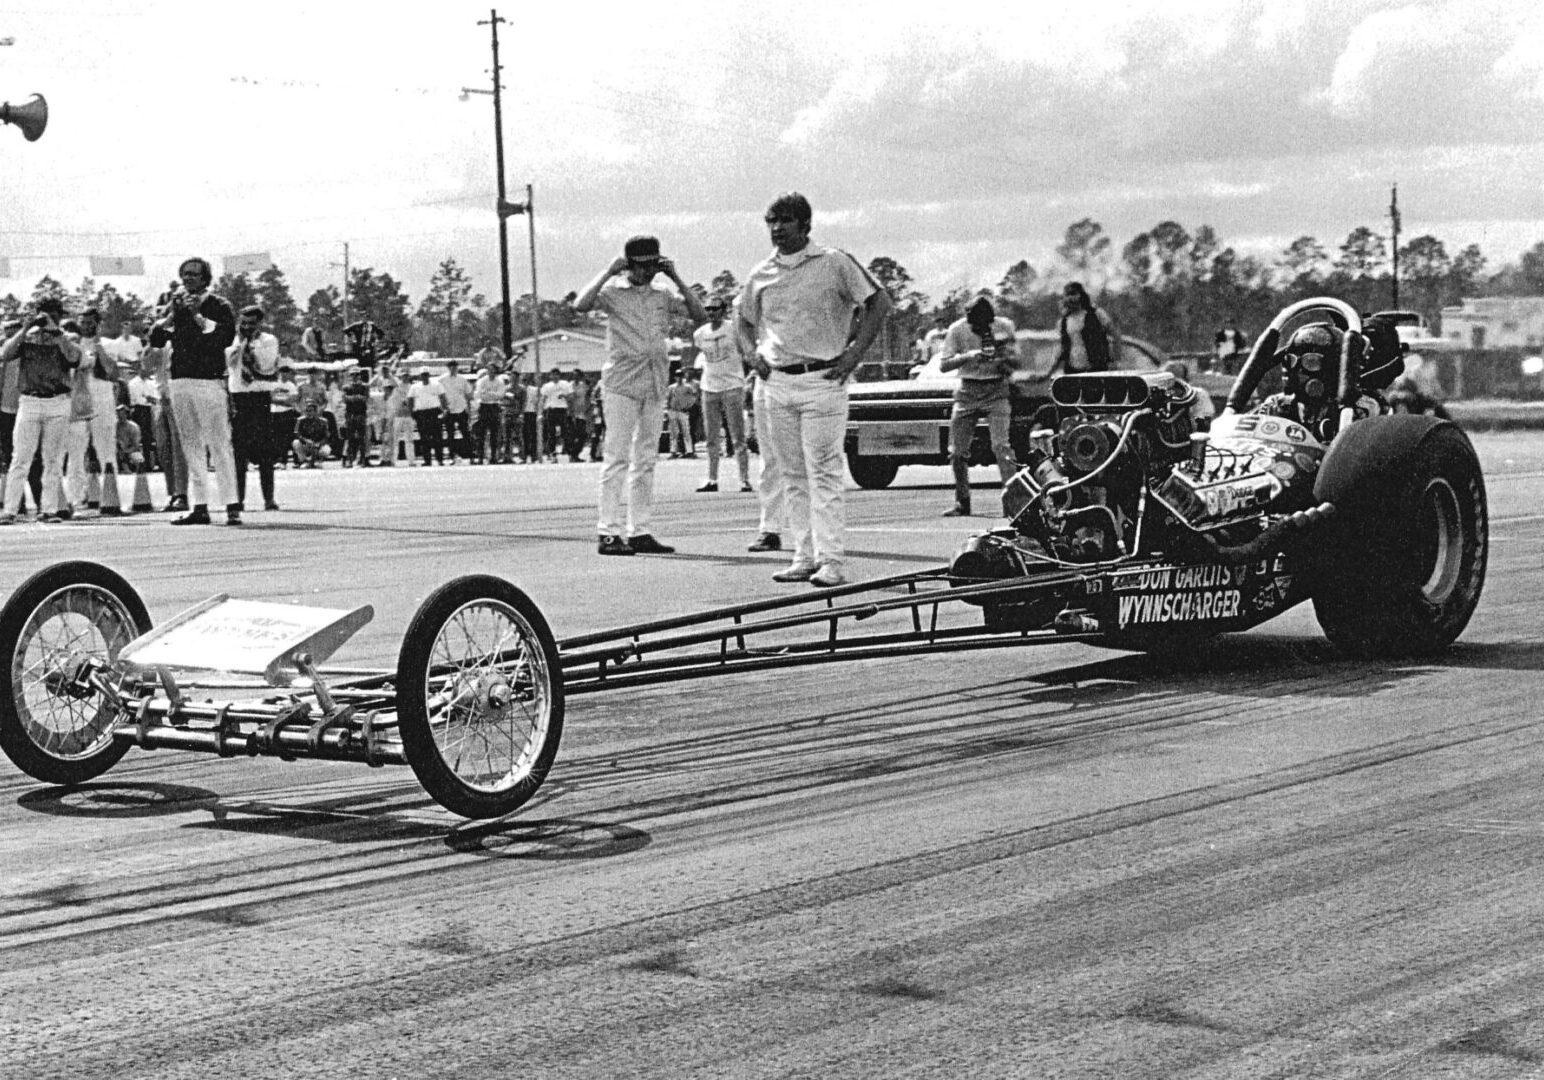 A black and white photo capturing the exhilarating rush of a man engaged in drag racing.